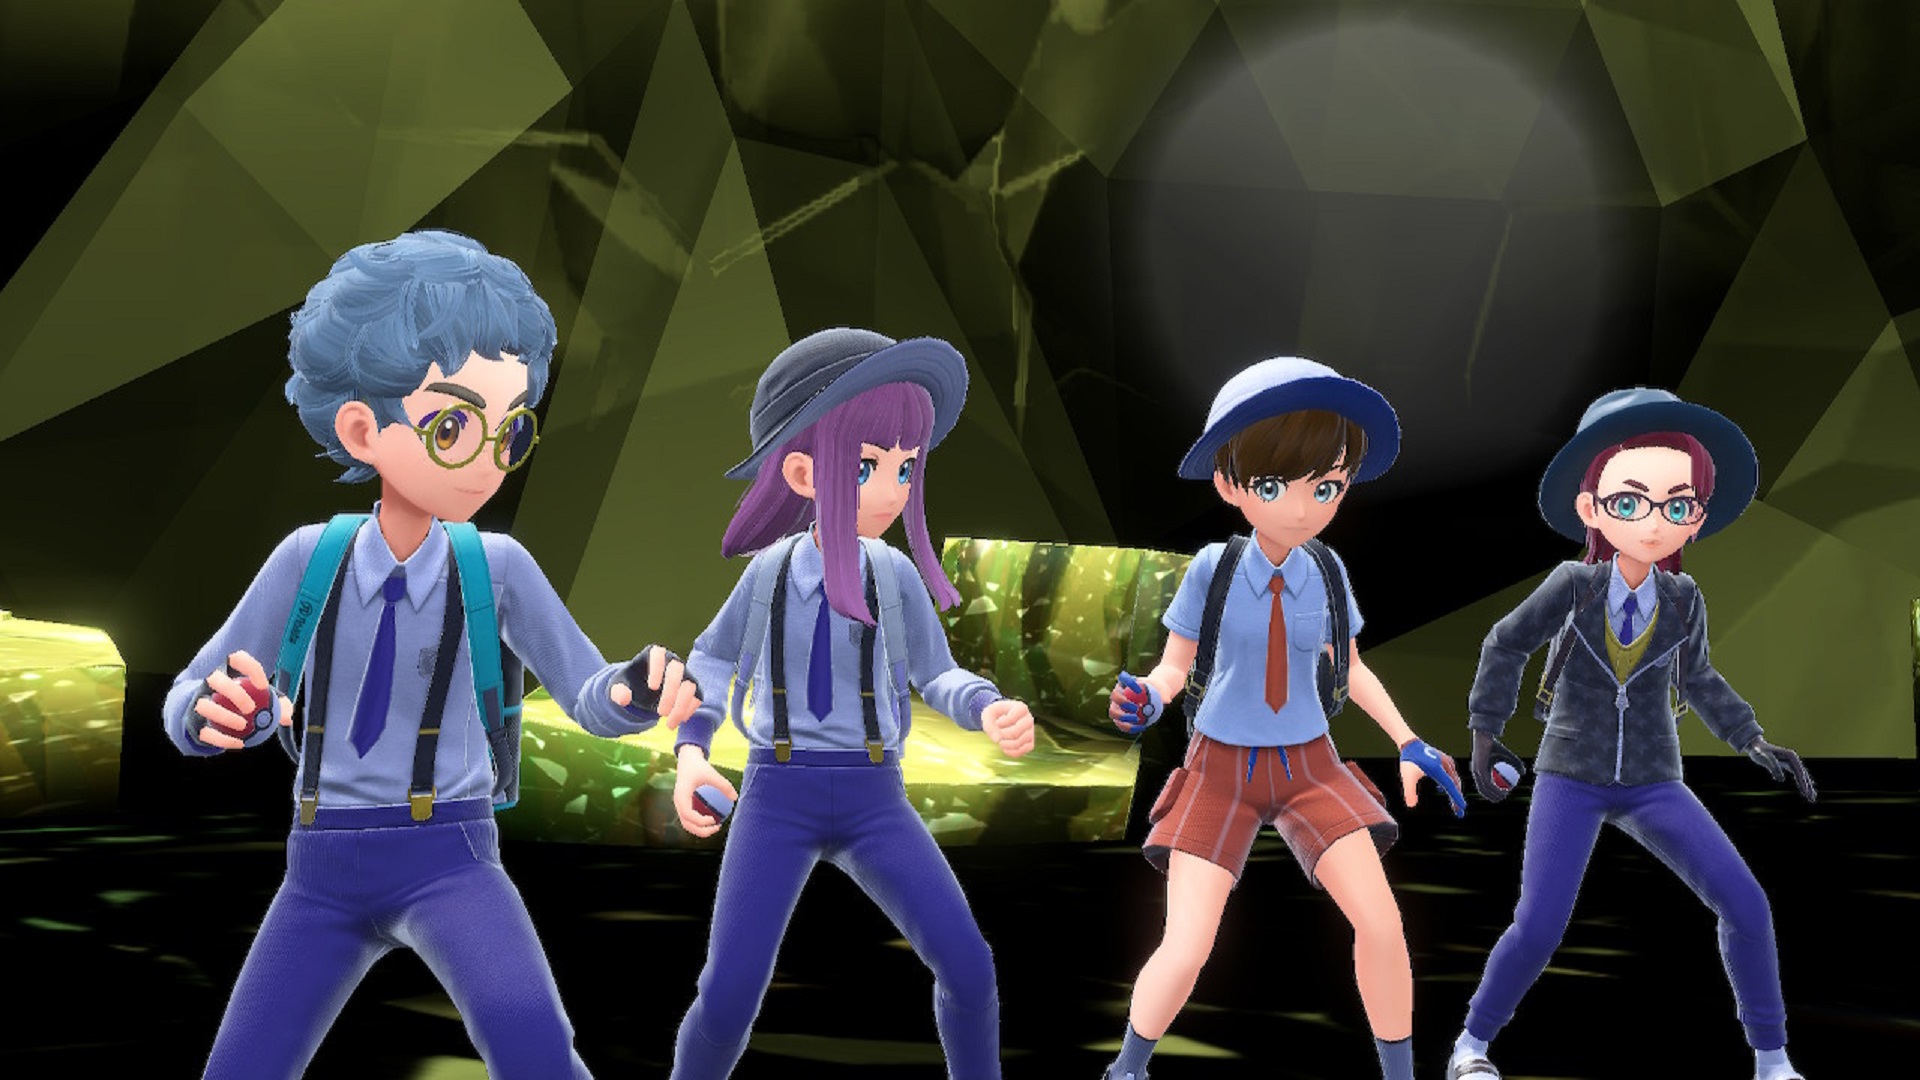 Pokemon Violet is now the lowest-rated mainline Pokemon game